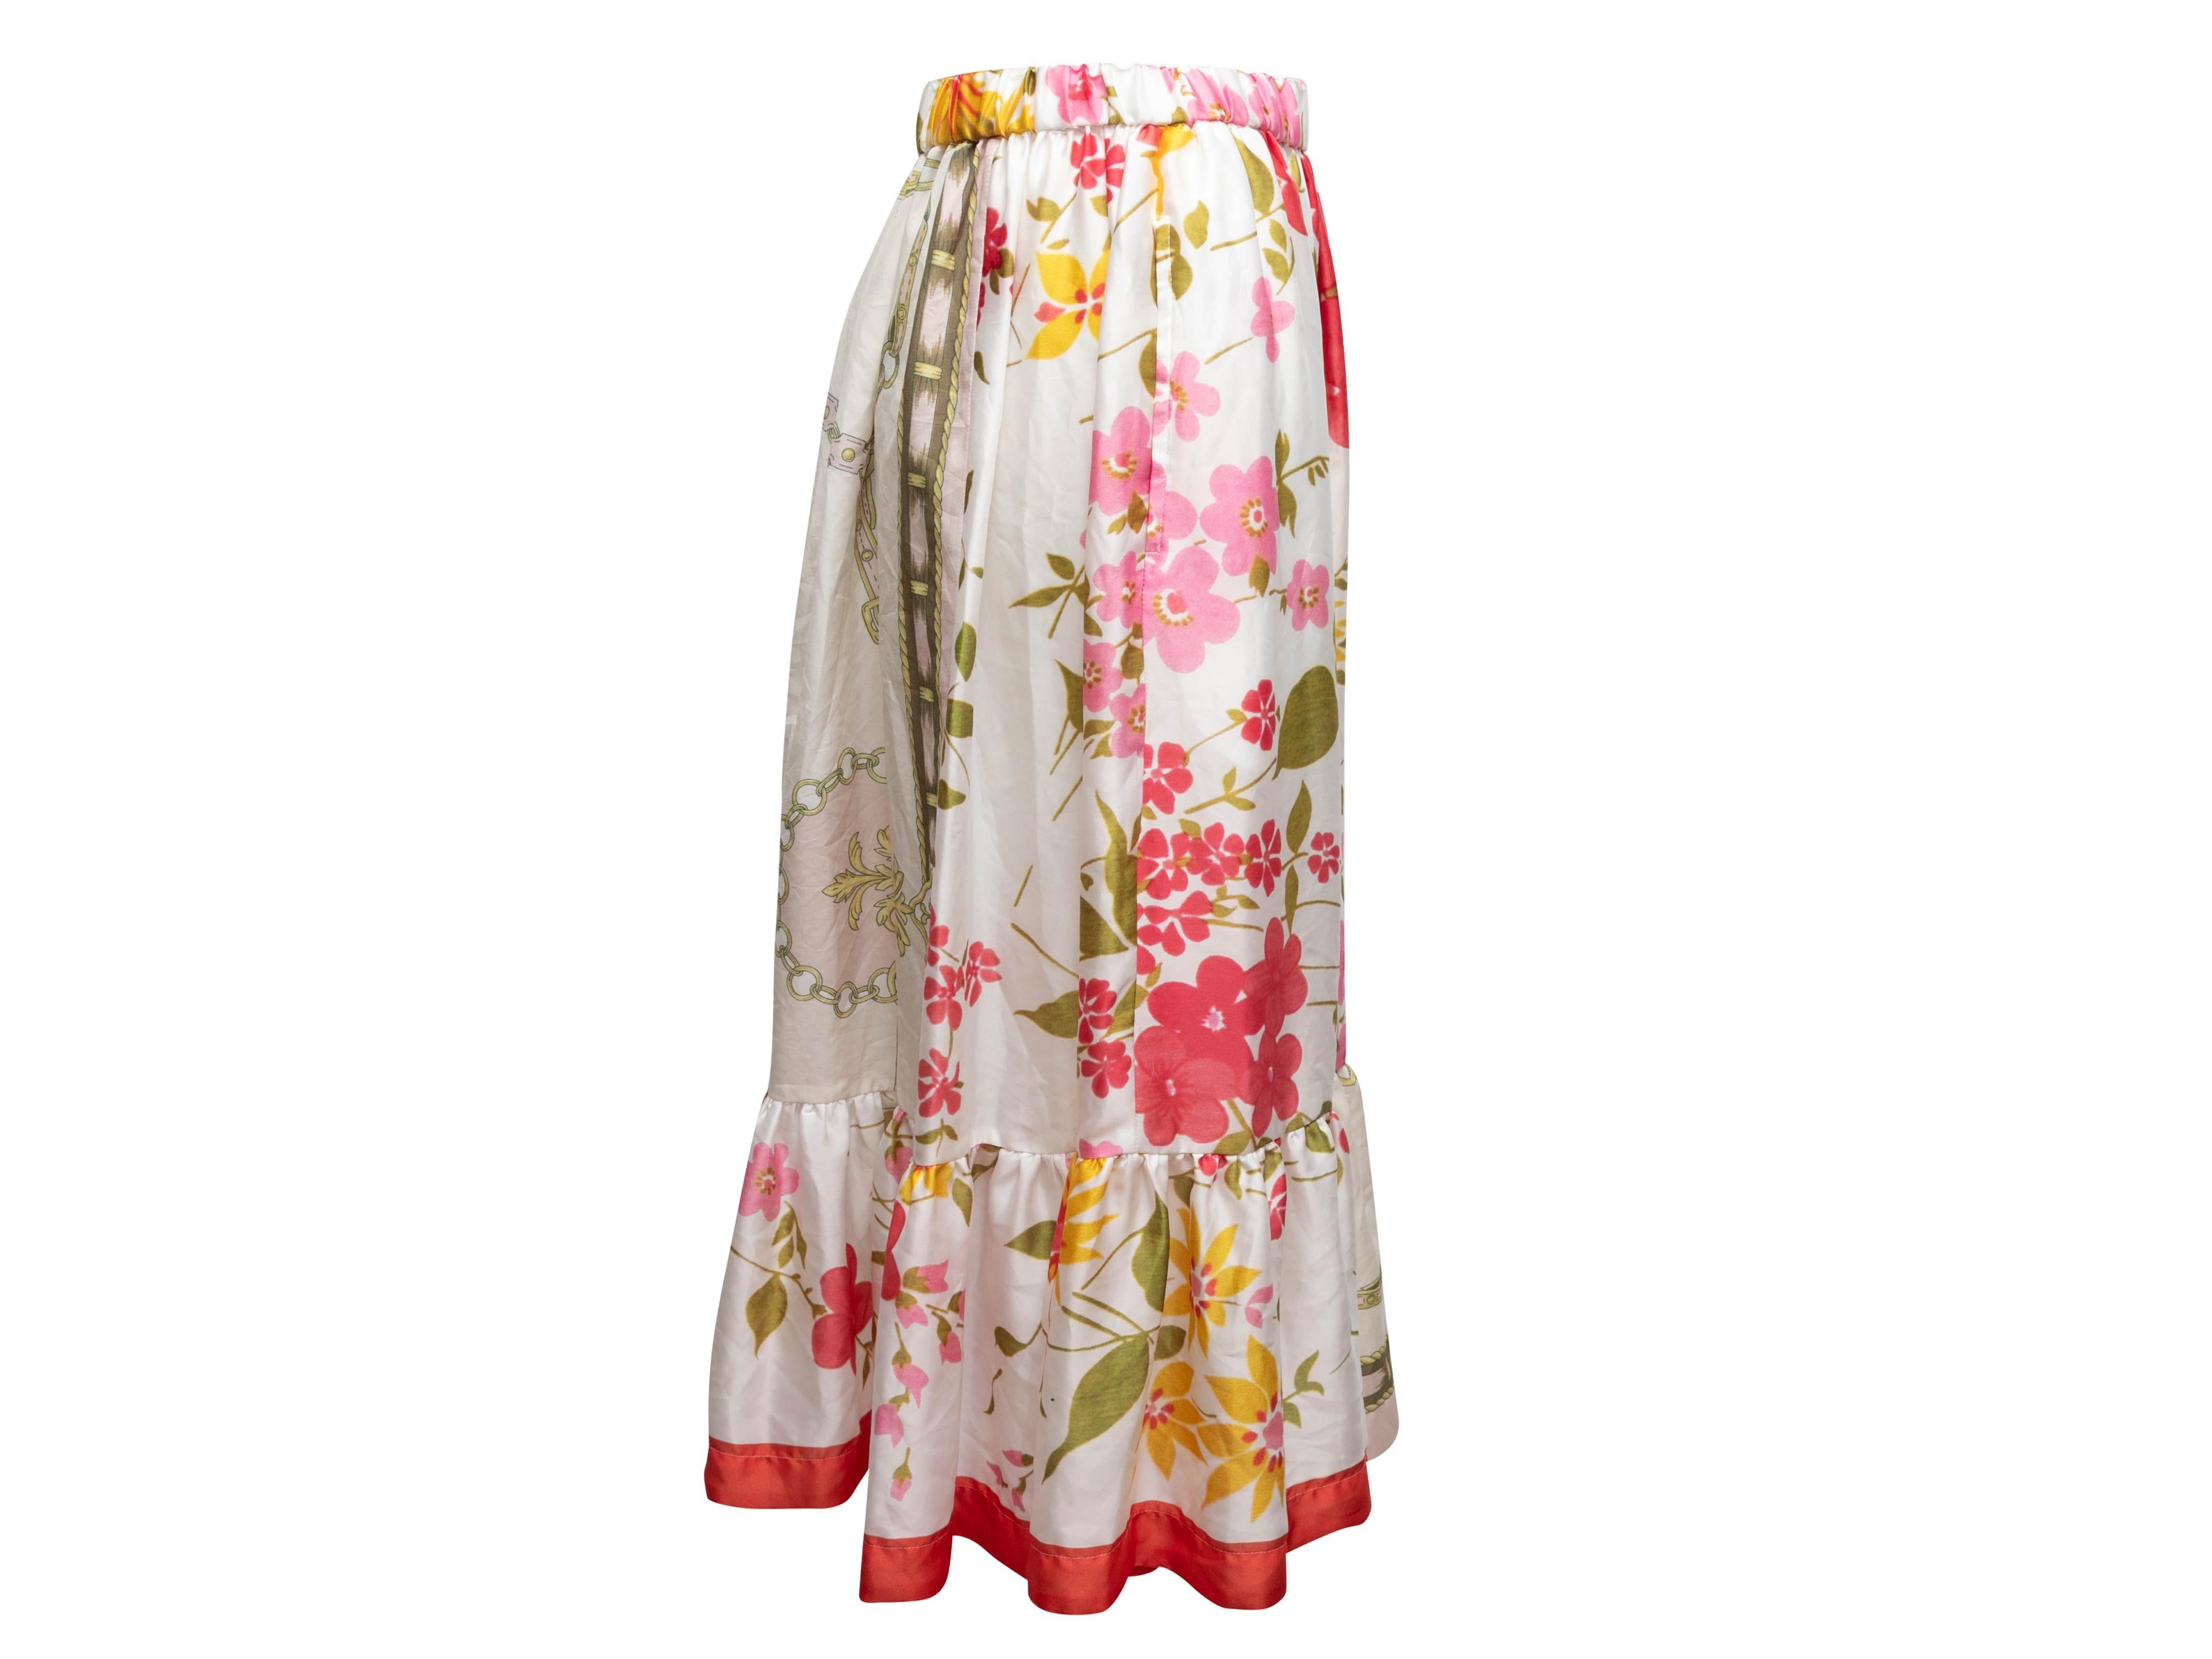 White and multicolor floral print midi skirt by Comme Des Garcons Girl. Elasticized waist. 29